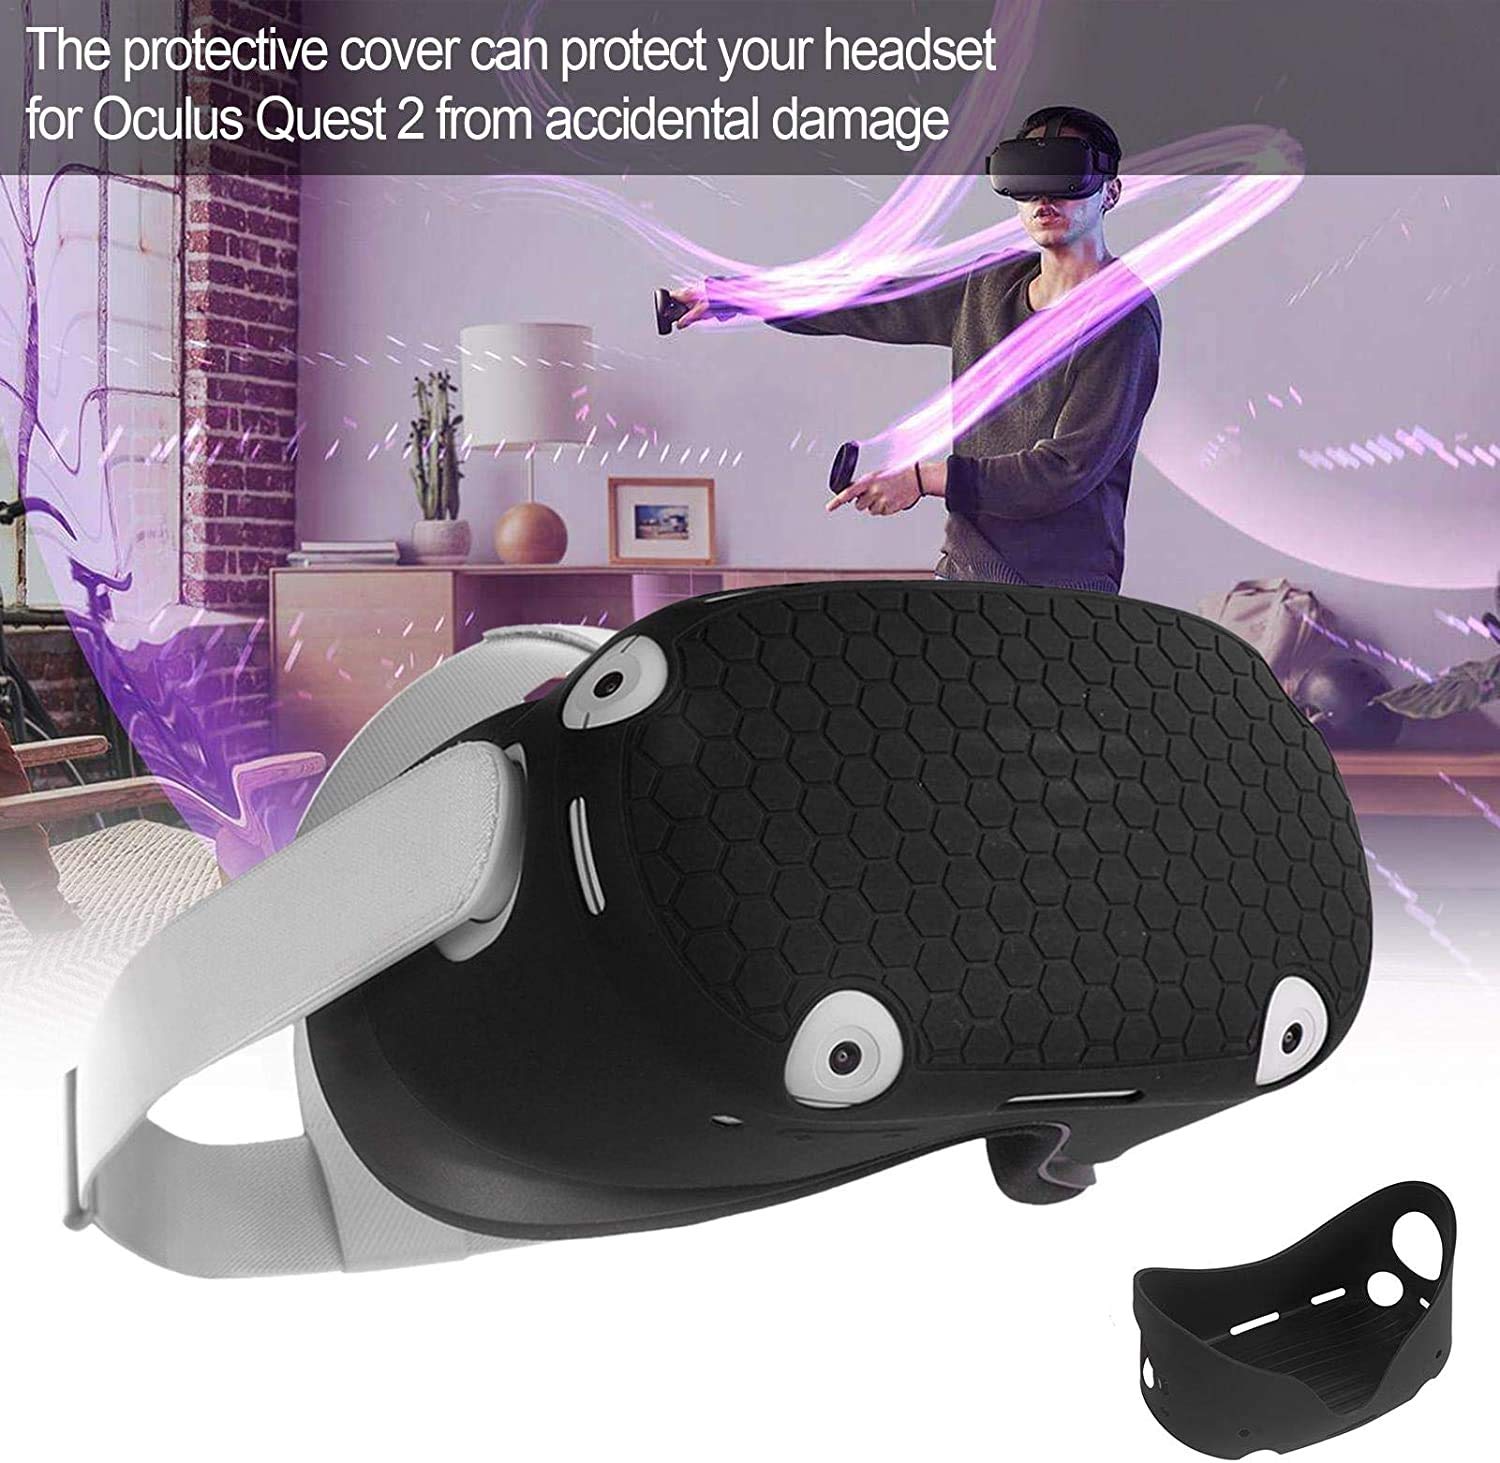 Silicone Protective Shell Cover for Meta/Oculus Quest 2 | Anti Scratch Anti Dust Anti Shock(White & Black)